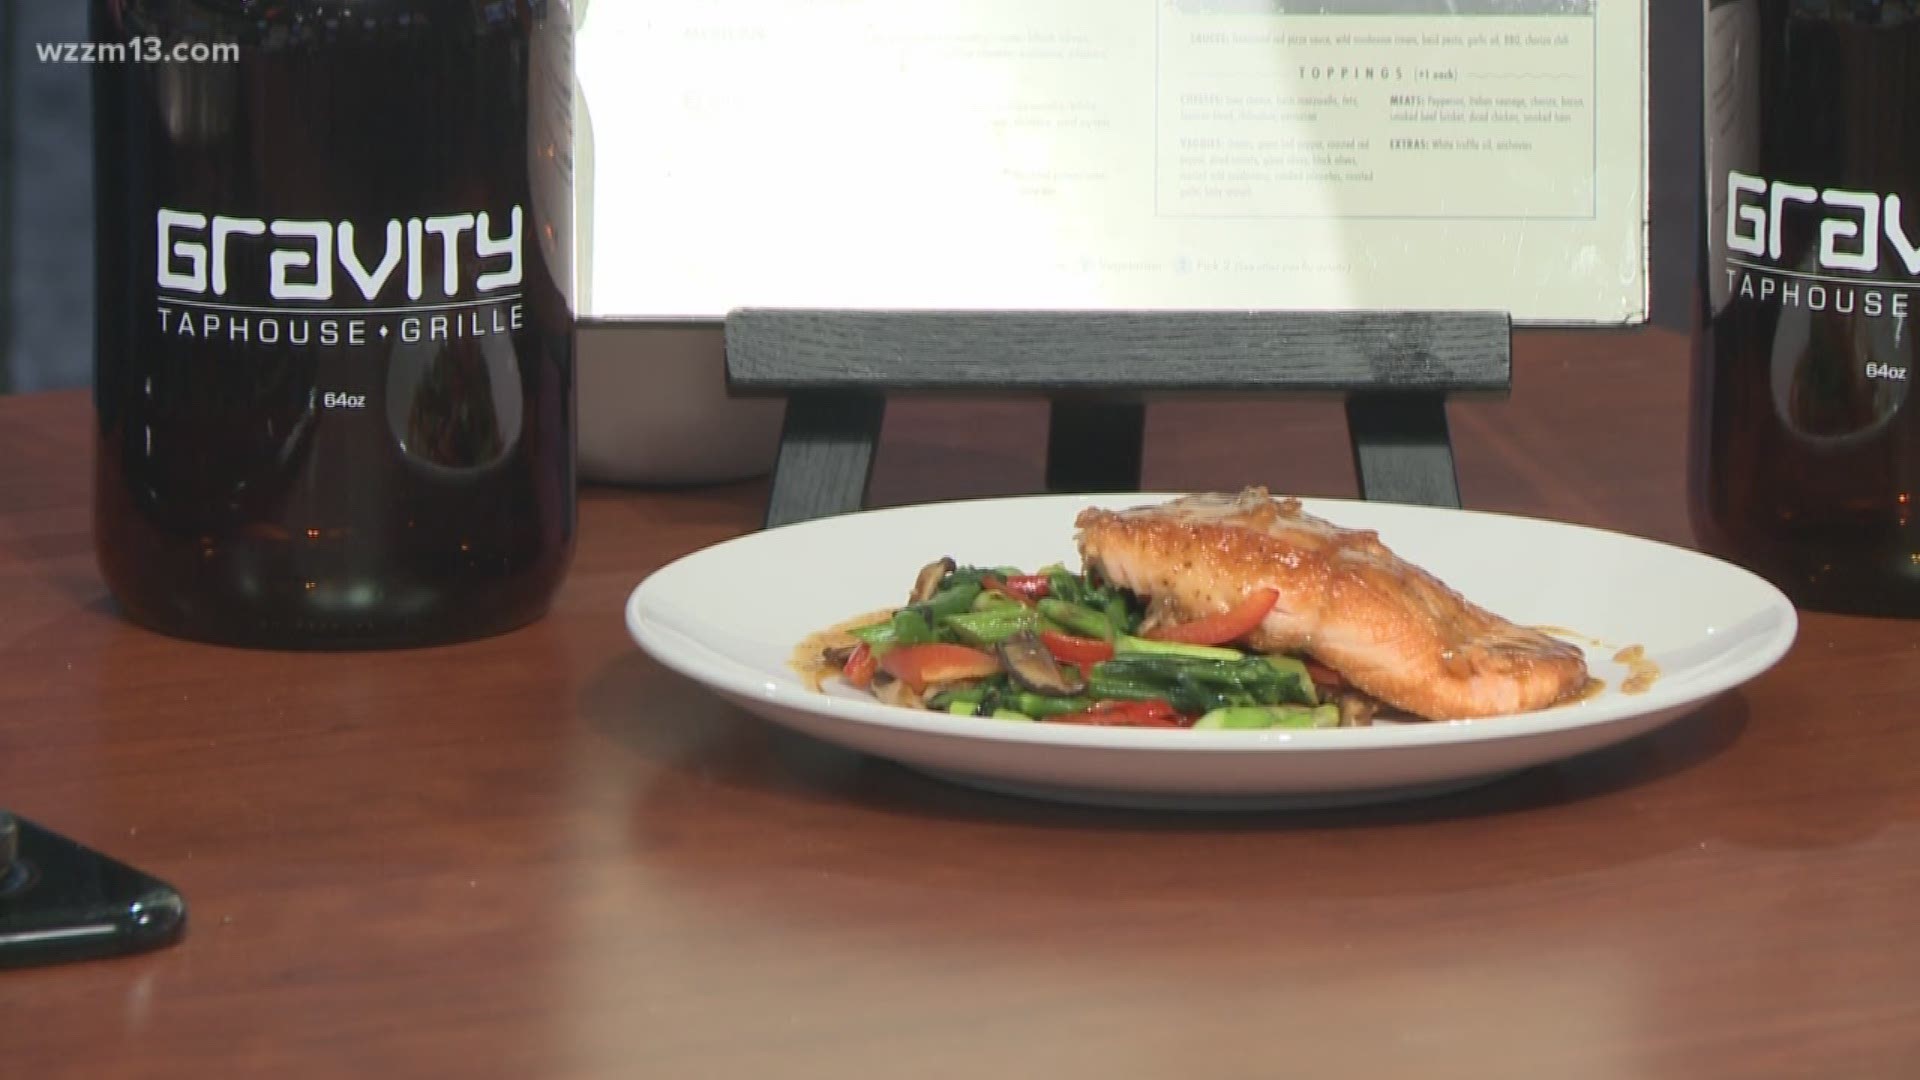 Chef John Taylor from Gravity Taphouse Grille came in to show us how to make healthy Pan Roasted Salmon with fresh veggie stir-fry.